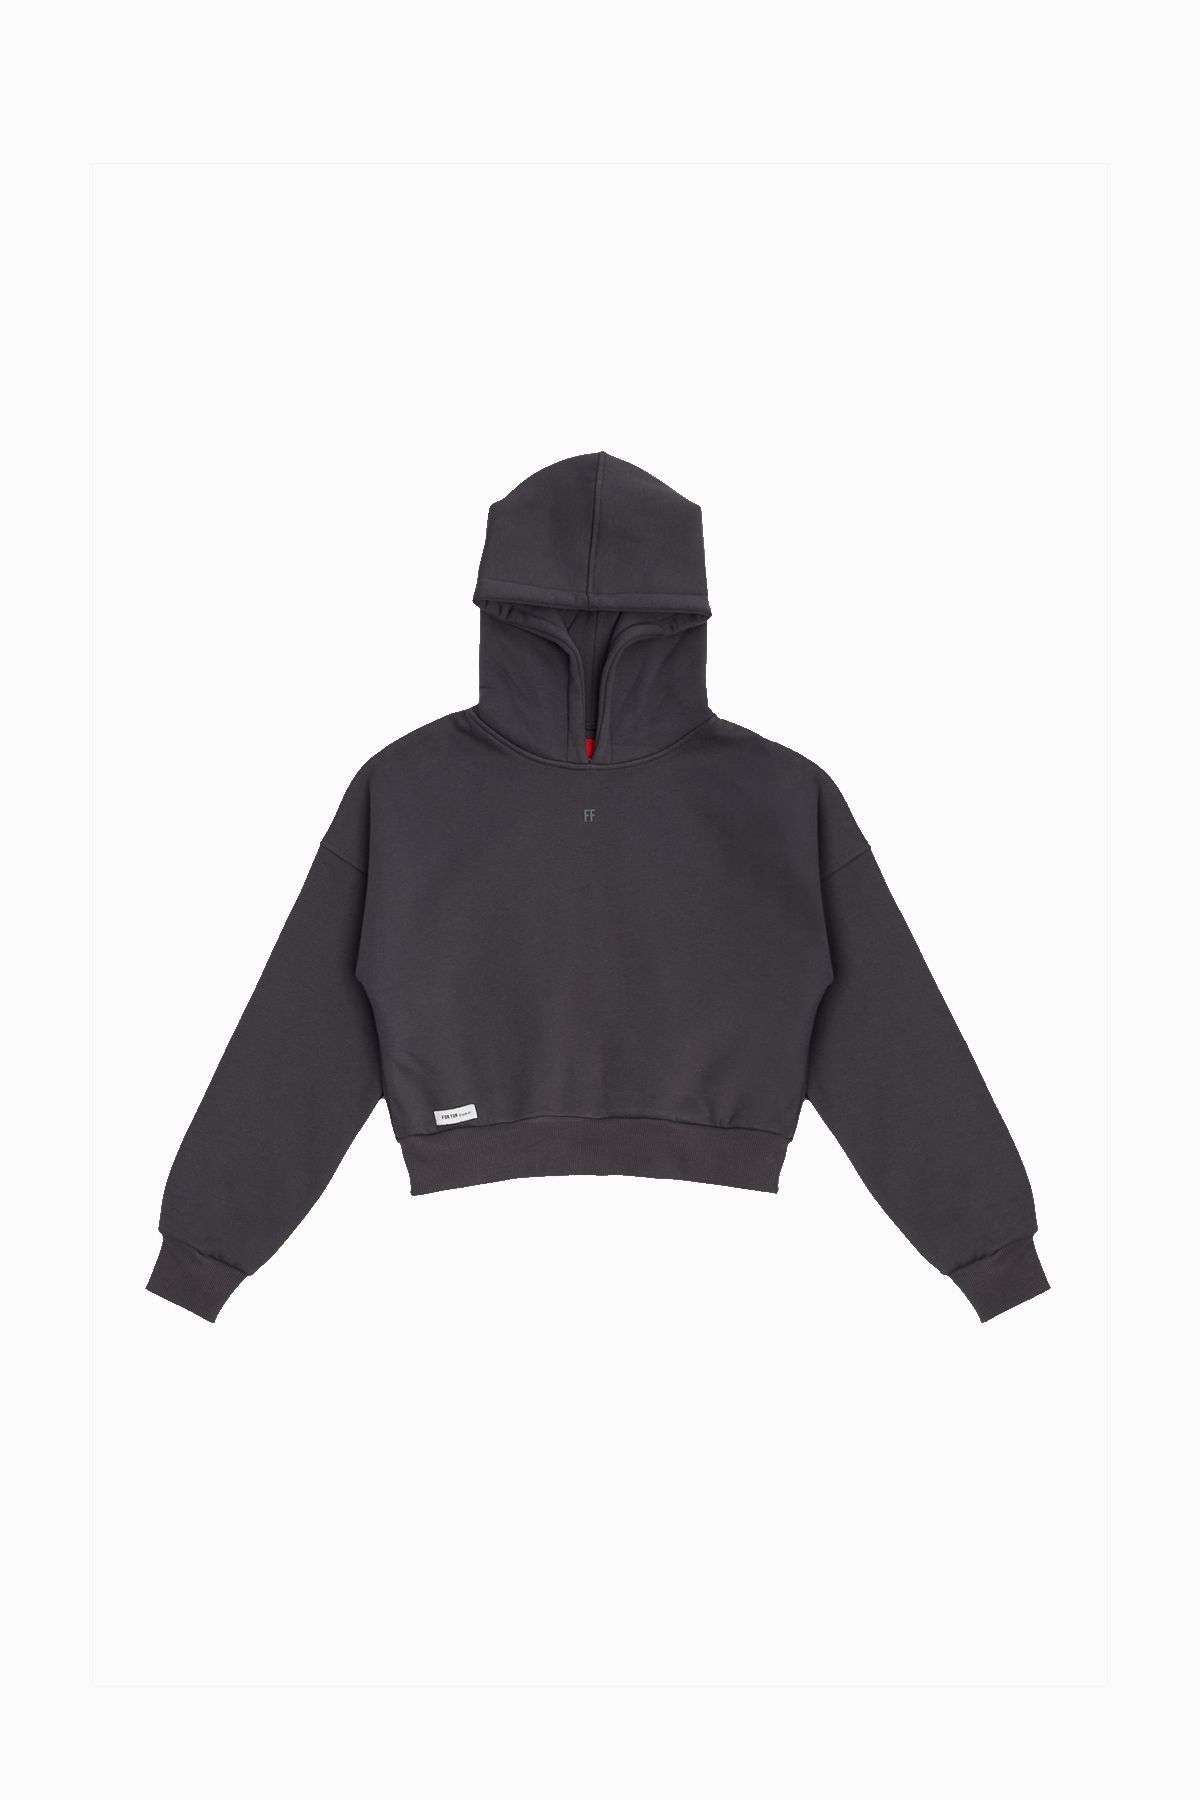 For Fun FF / Women Pullover Hoodie